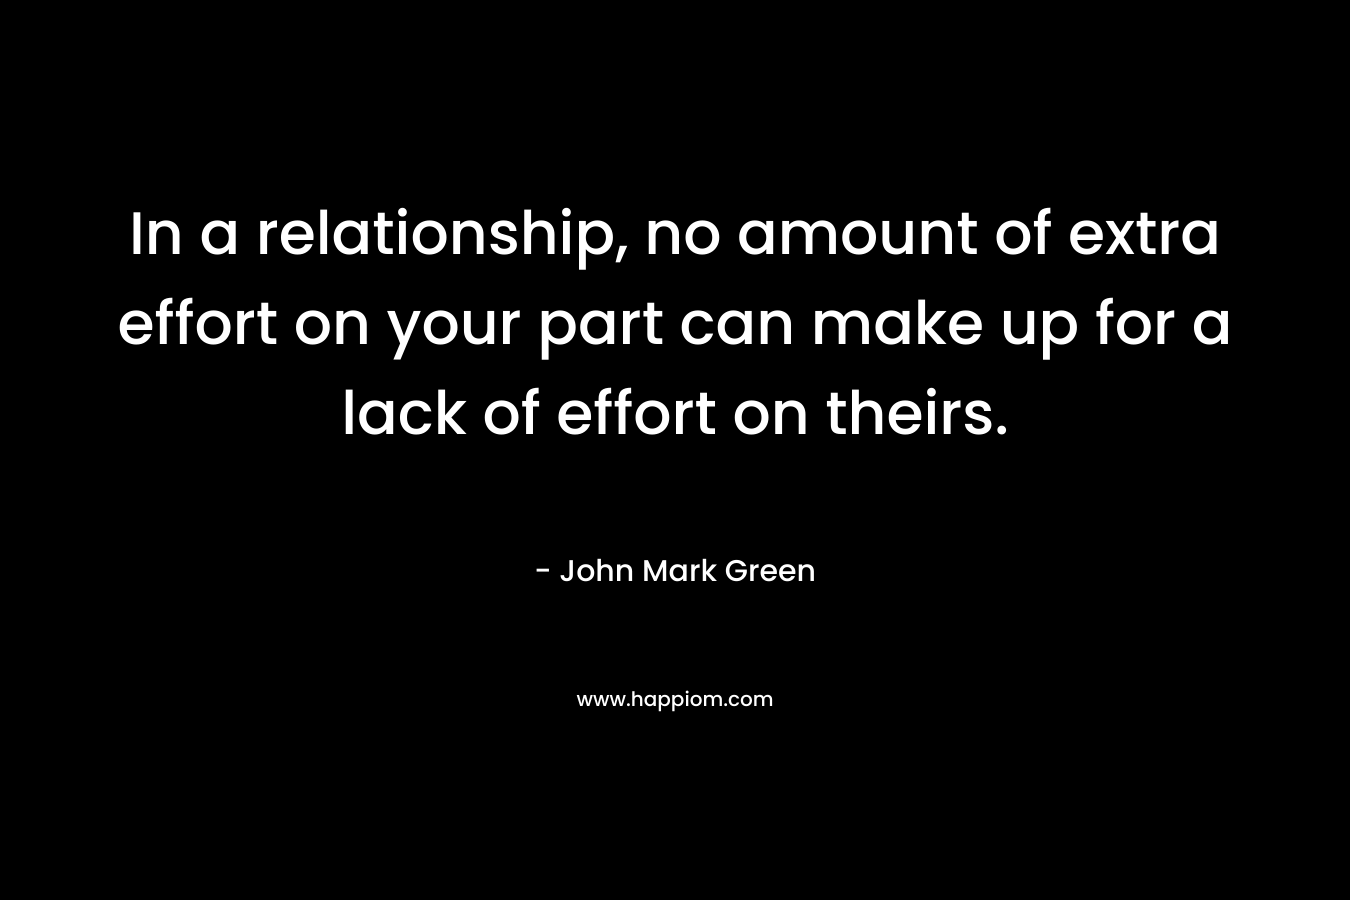 In a relationship, no amount of extra effort on your part can make up for a lack of effort on theirs. – John Mark Green